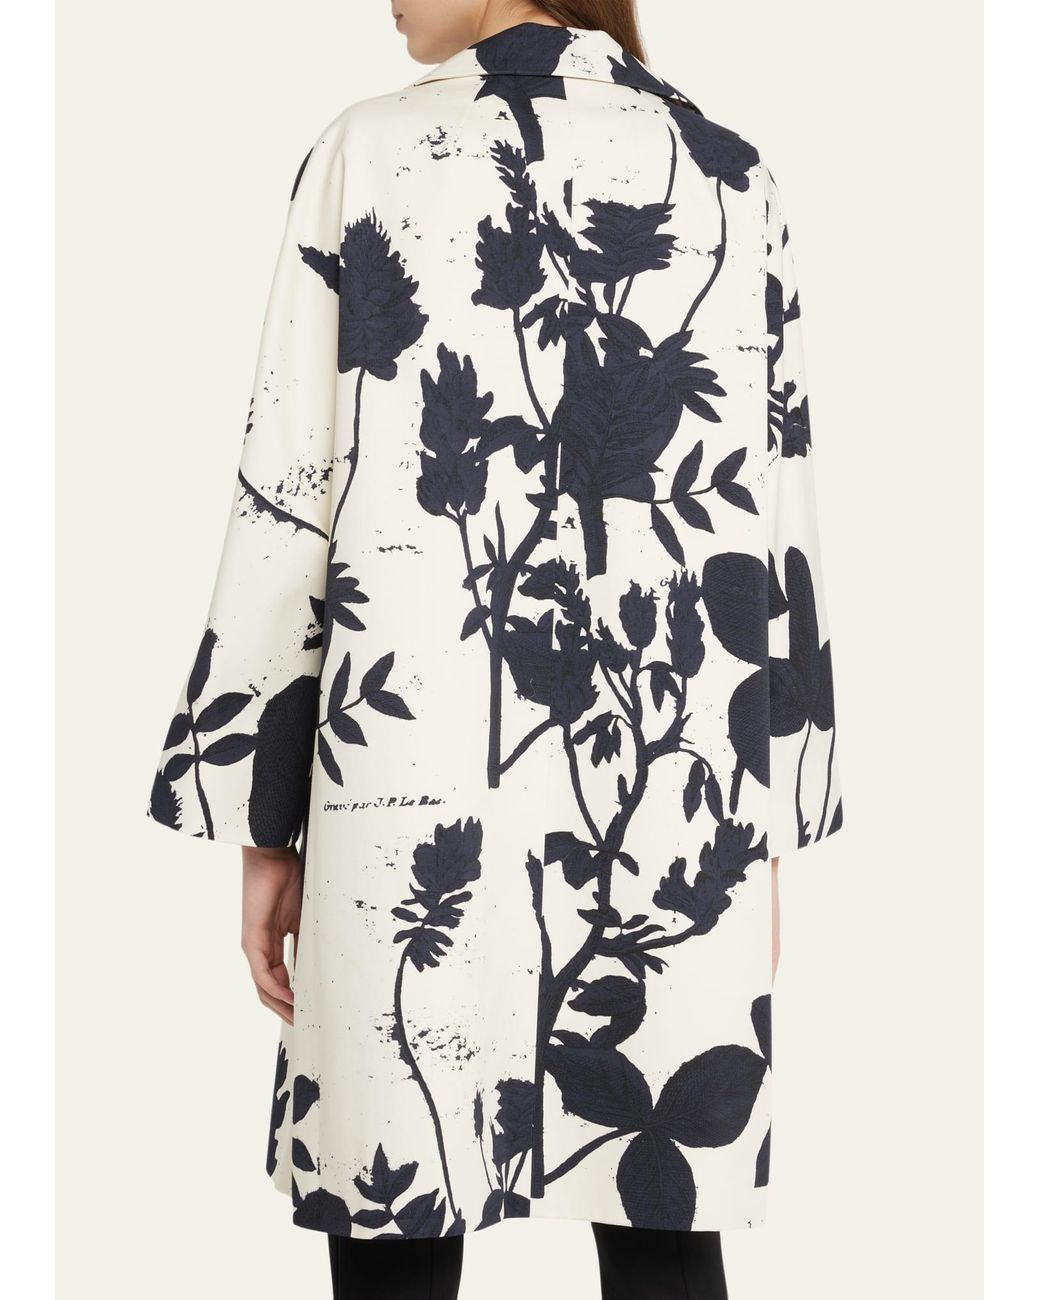 Libertine Cyanotypes Abstract Printed Top Coat in Natural | Lyst